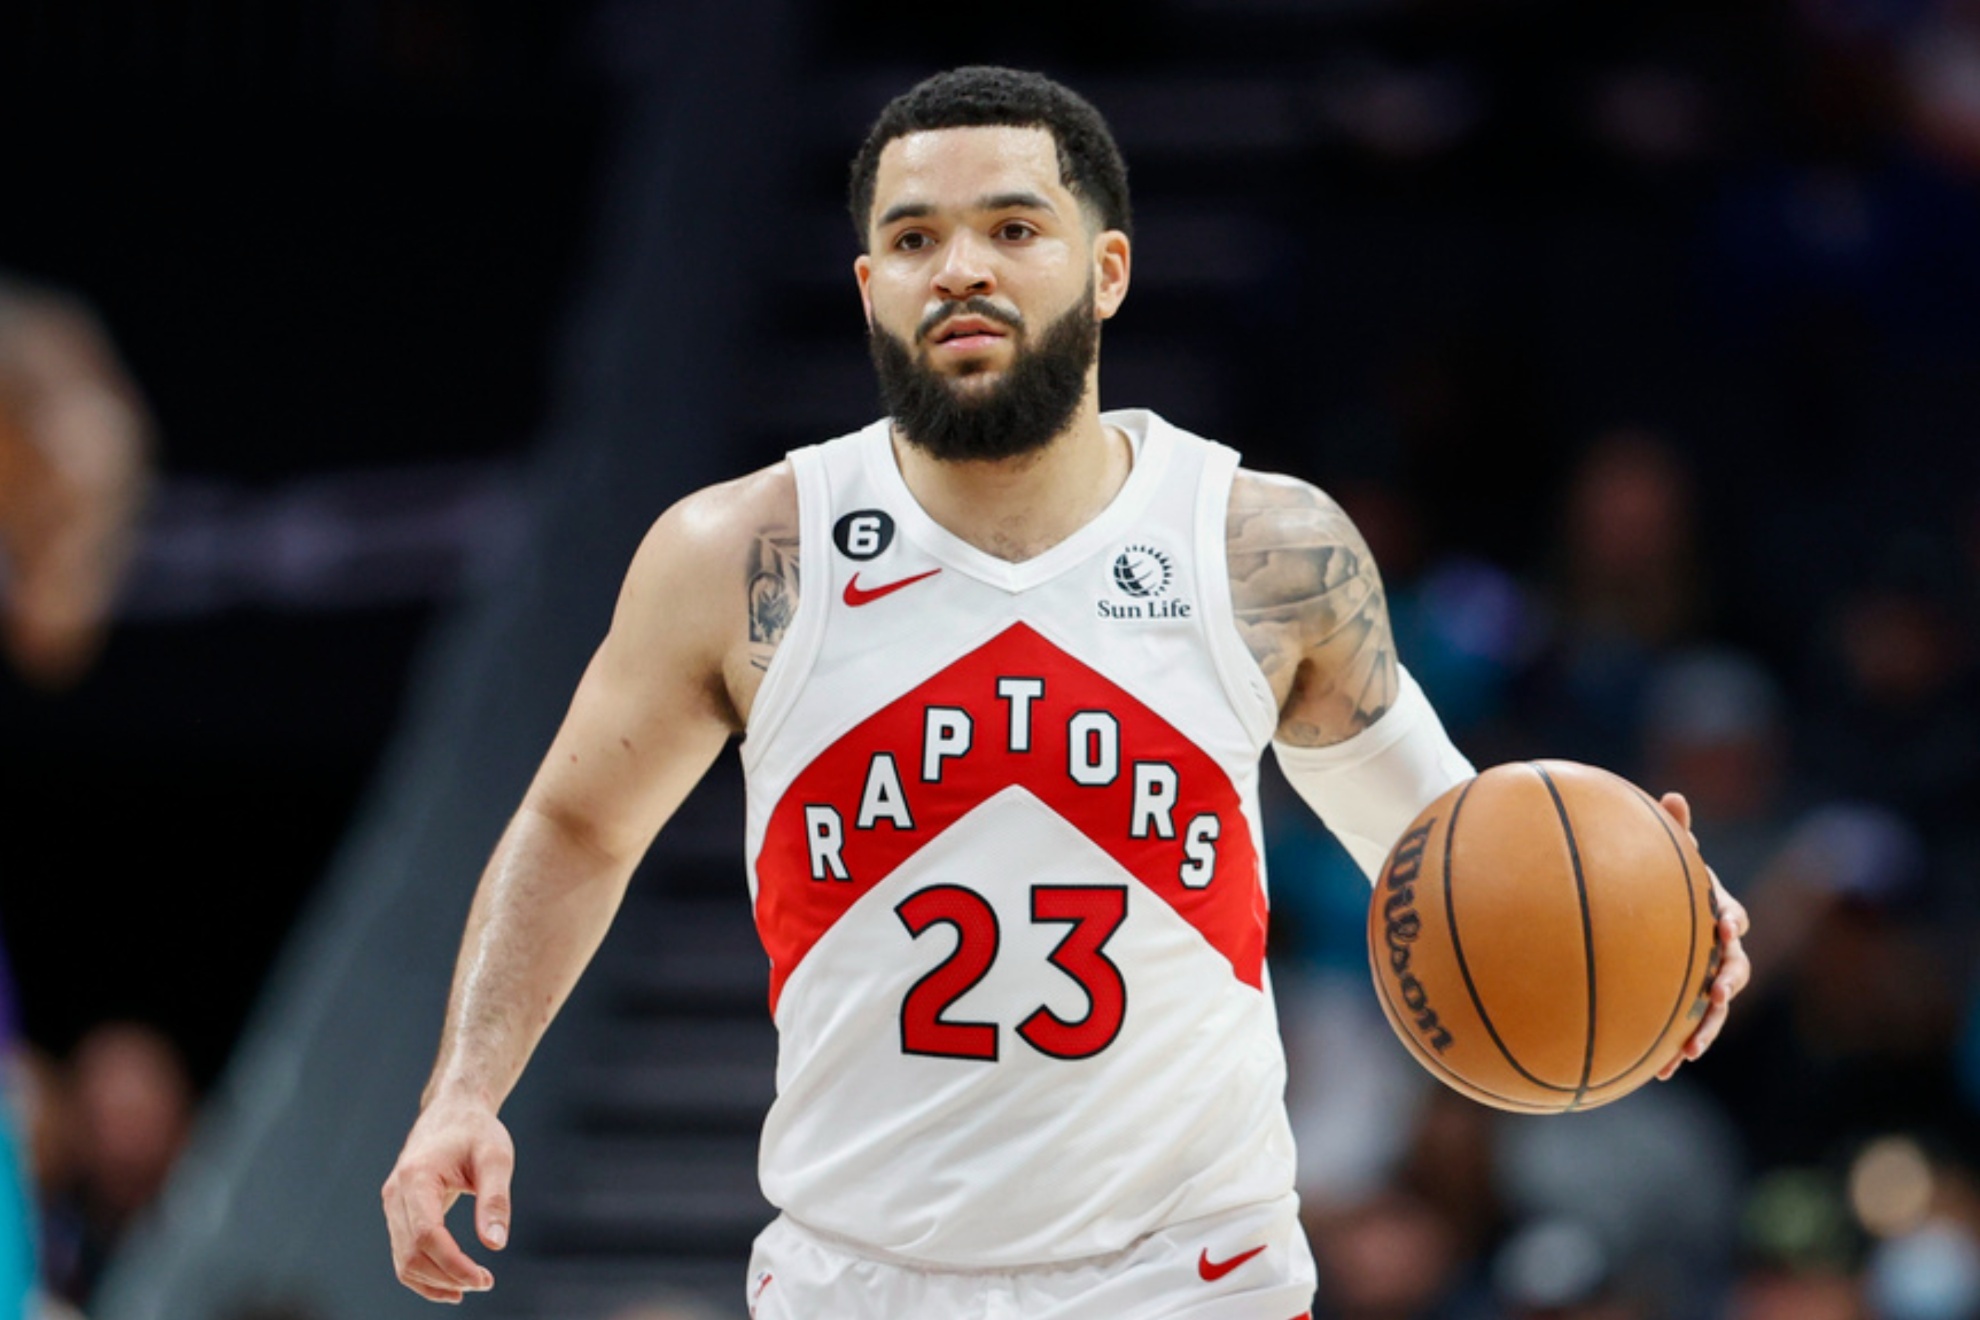 Fred VanVleet gt traded to the Houston Rockets in the NBA Free Agency